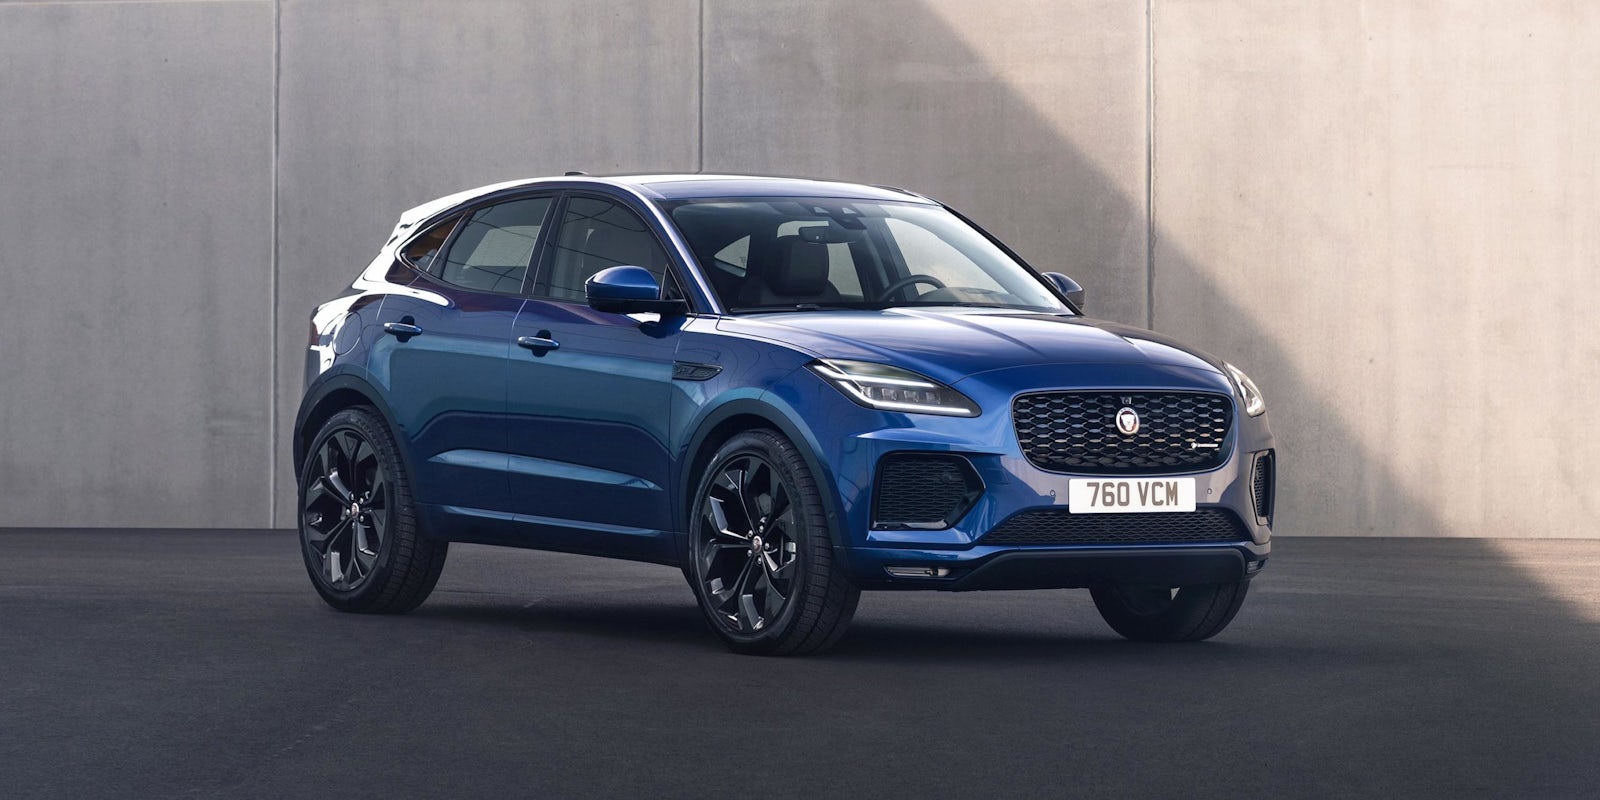 21 Jaguar E Pace And Plug In Hybrid Revealed Price Specs And Release Date Carwow